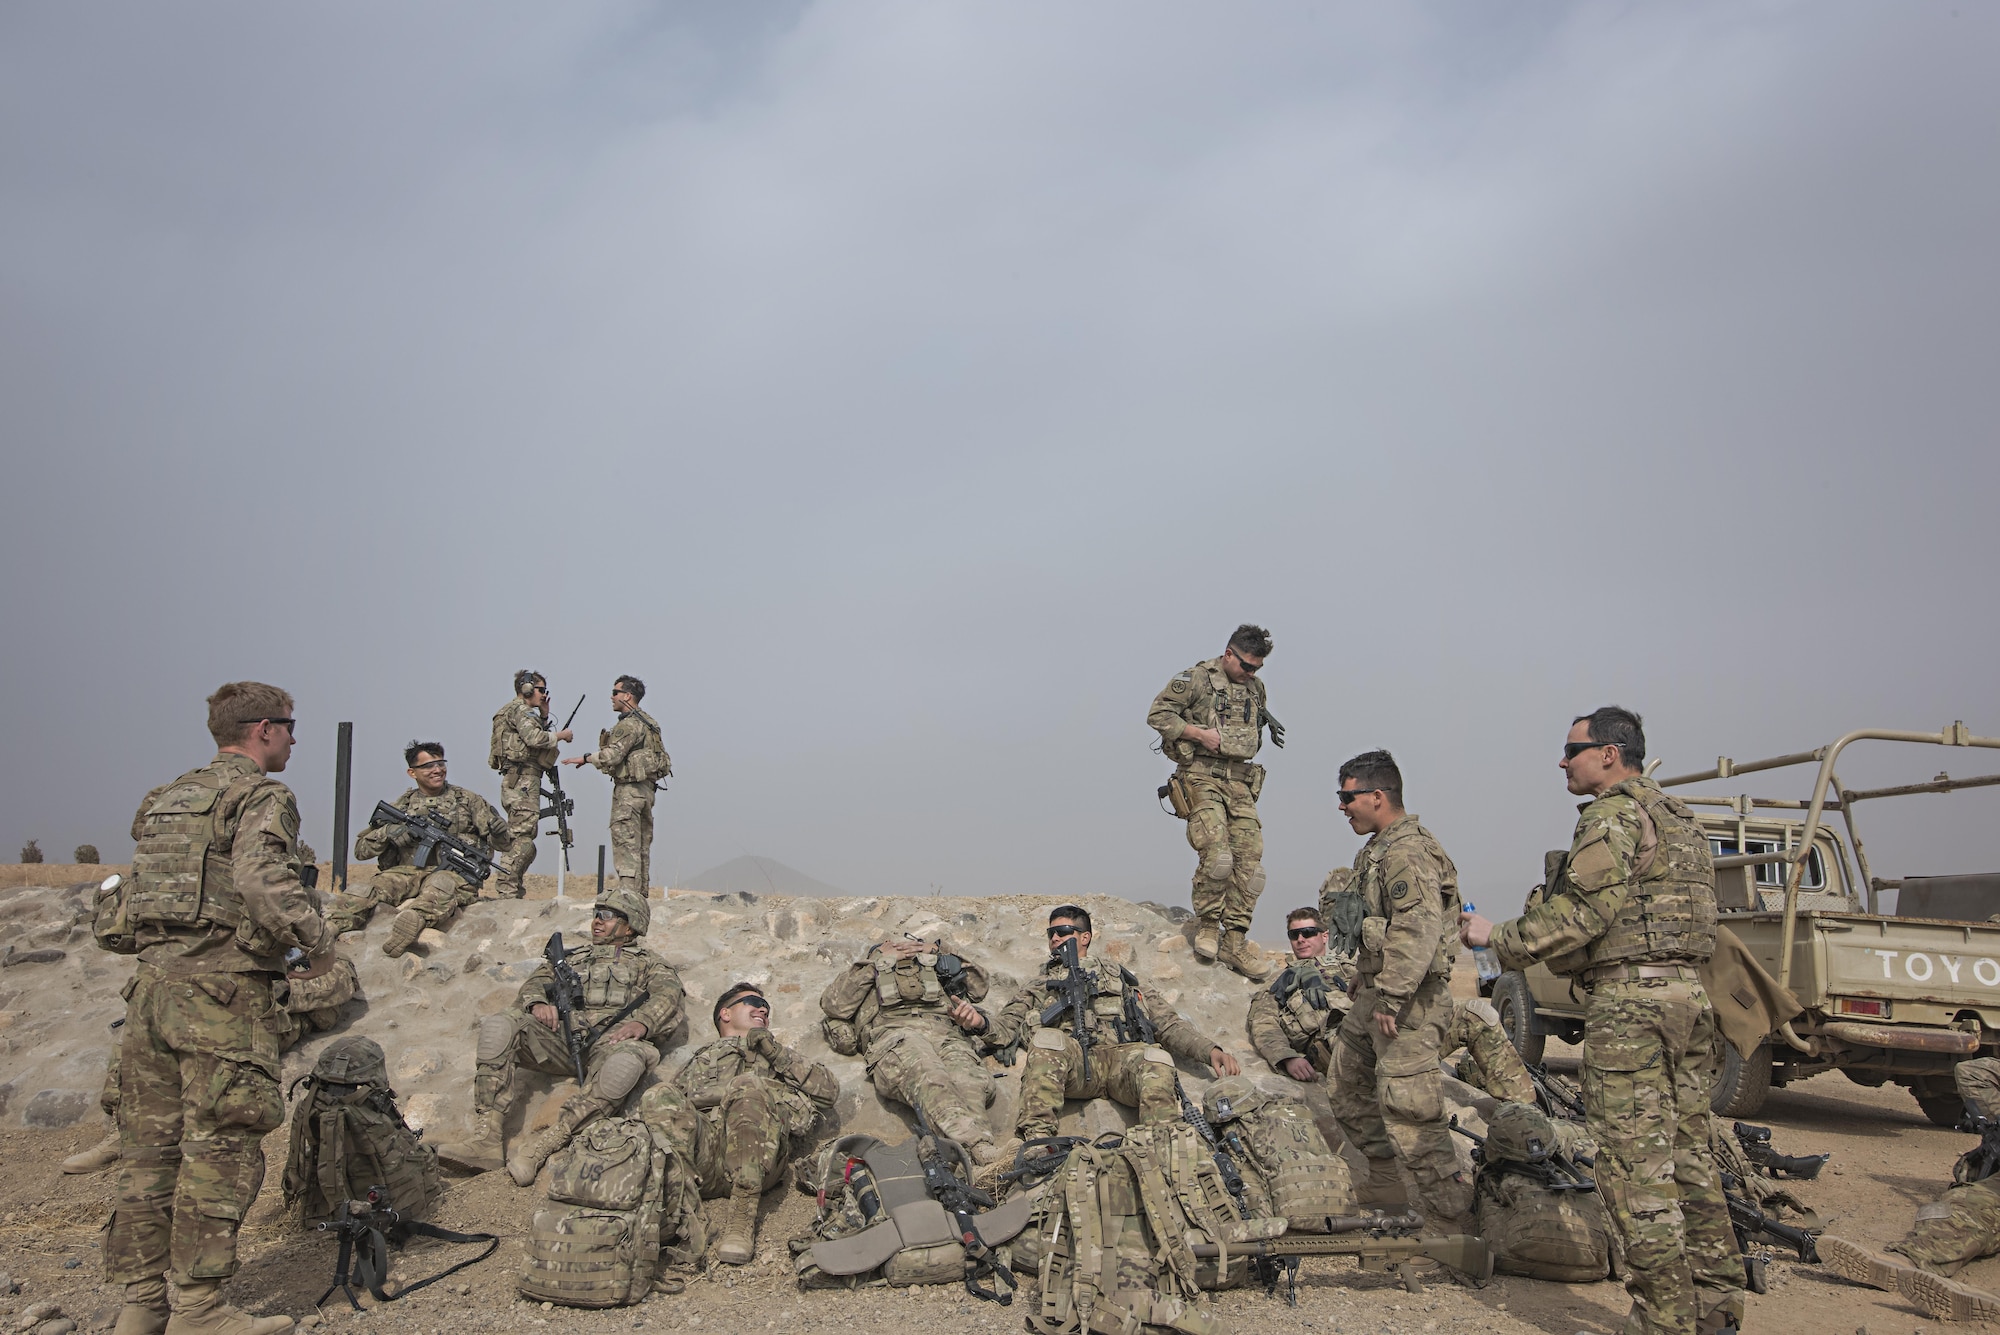 Members of Able Platoon, 1st Squadron, 3rd Cavalry Regiment, and Tech. Sgt. Jeremy Rarang, 817th Expeditionary Air Support Operations Squadron joint terminal attack controller, joke together after training Nov. 21, 2016 at Forward Operating Base Dahlke, Afghanistan. JTACs direct aircraft for use during close air support and offensive operations from a forward position. (U.S. Air Force photo by Staff Sgt. Katherine Spessa)